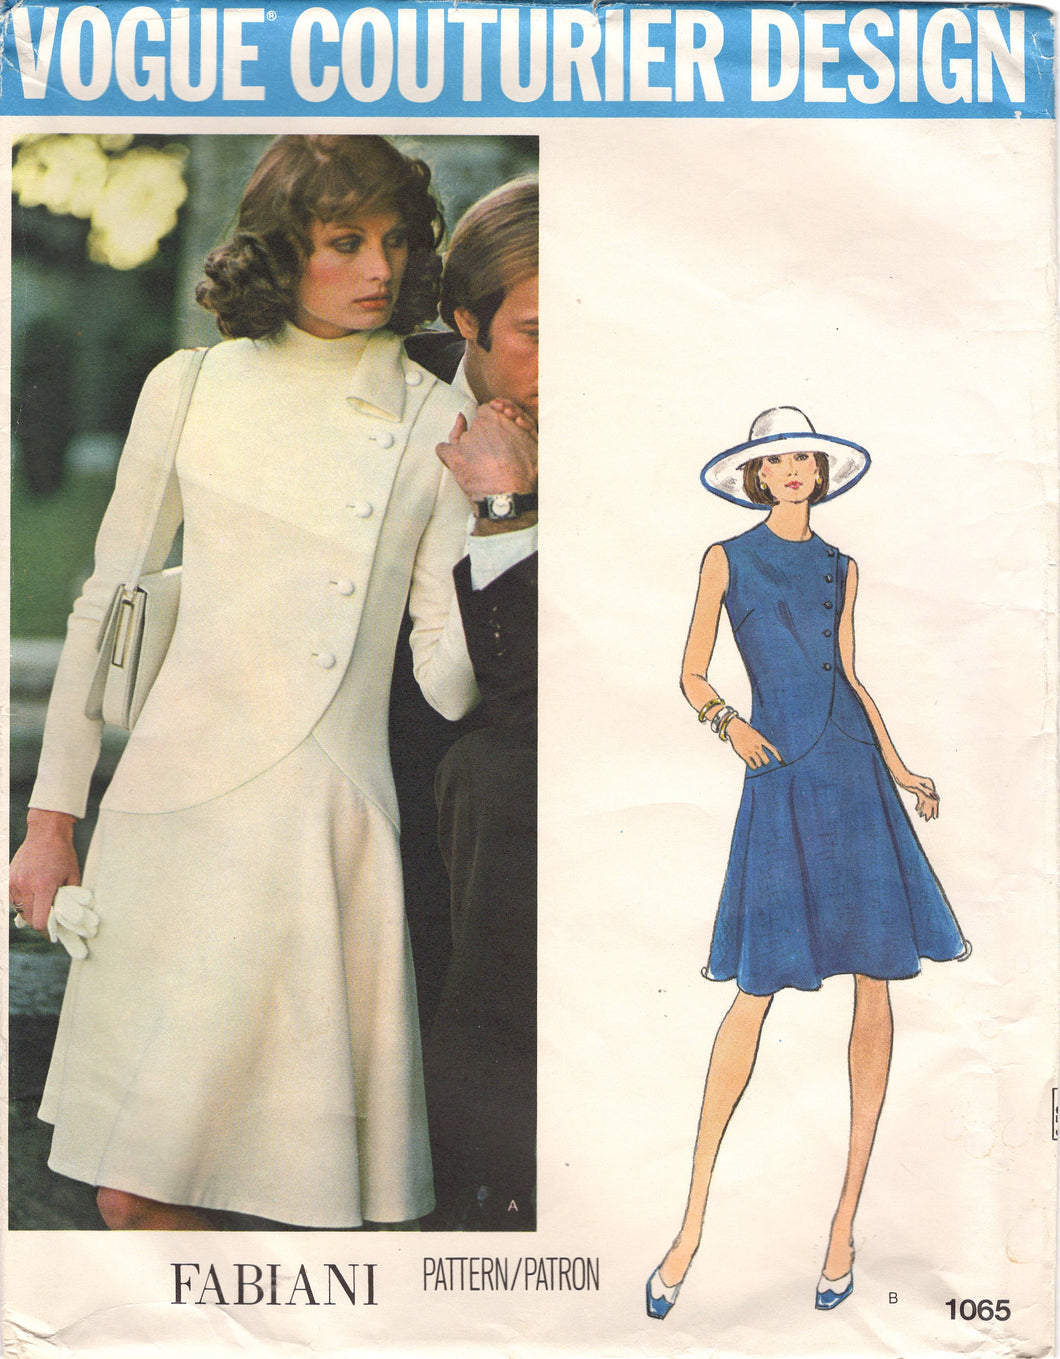 1970's Vogue Couturier Design One Piece Dress with Cross over front and Button detail with Belt - Fabiani - Bust 34